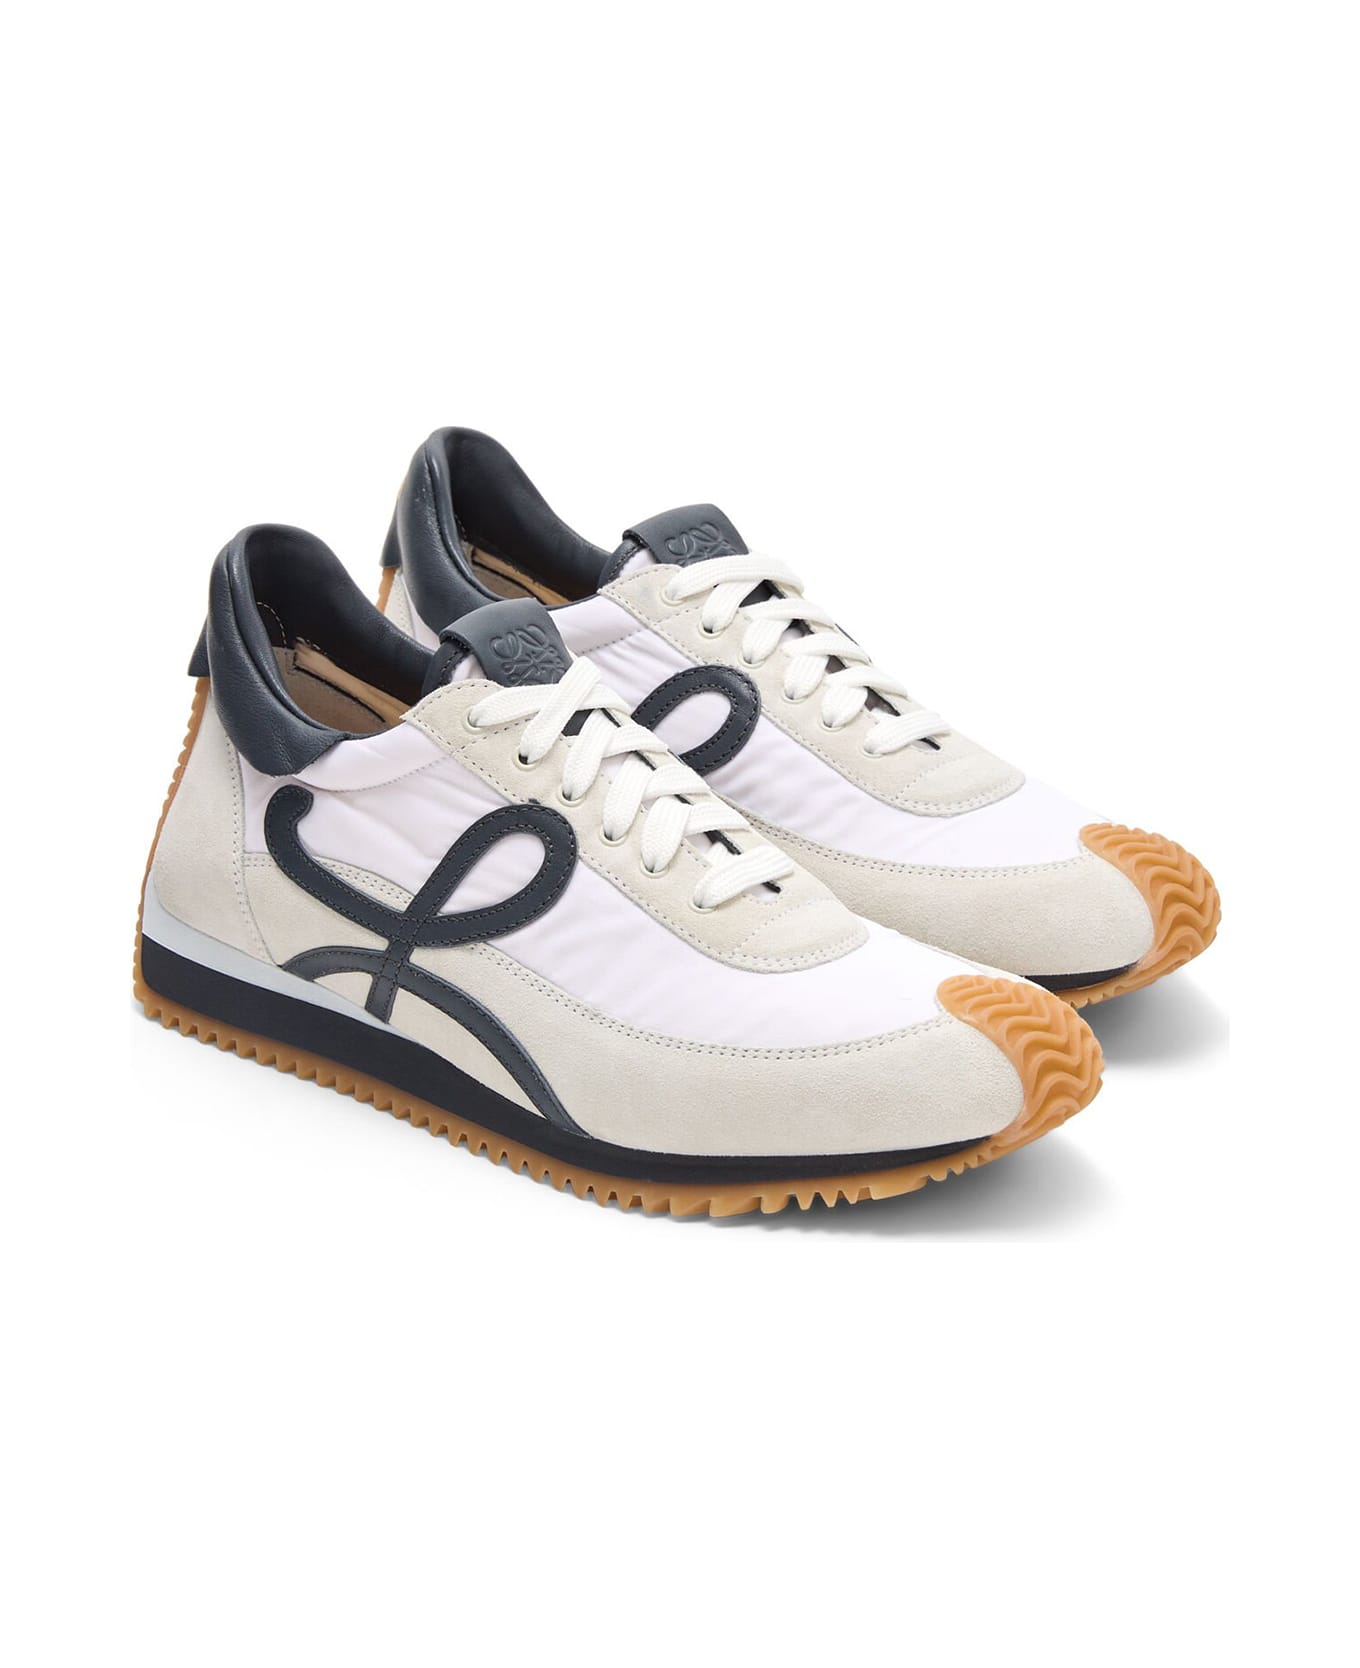 Loewe Sneakers - Blue anthracite/white スニーカー